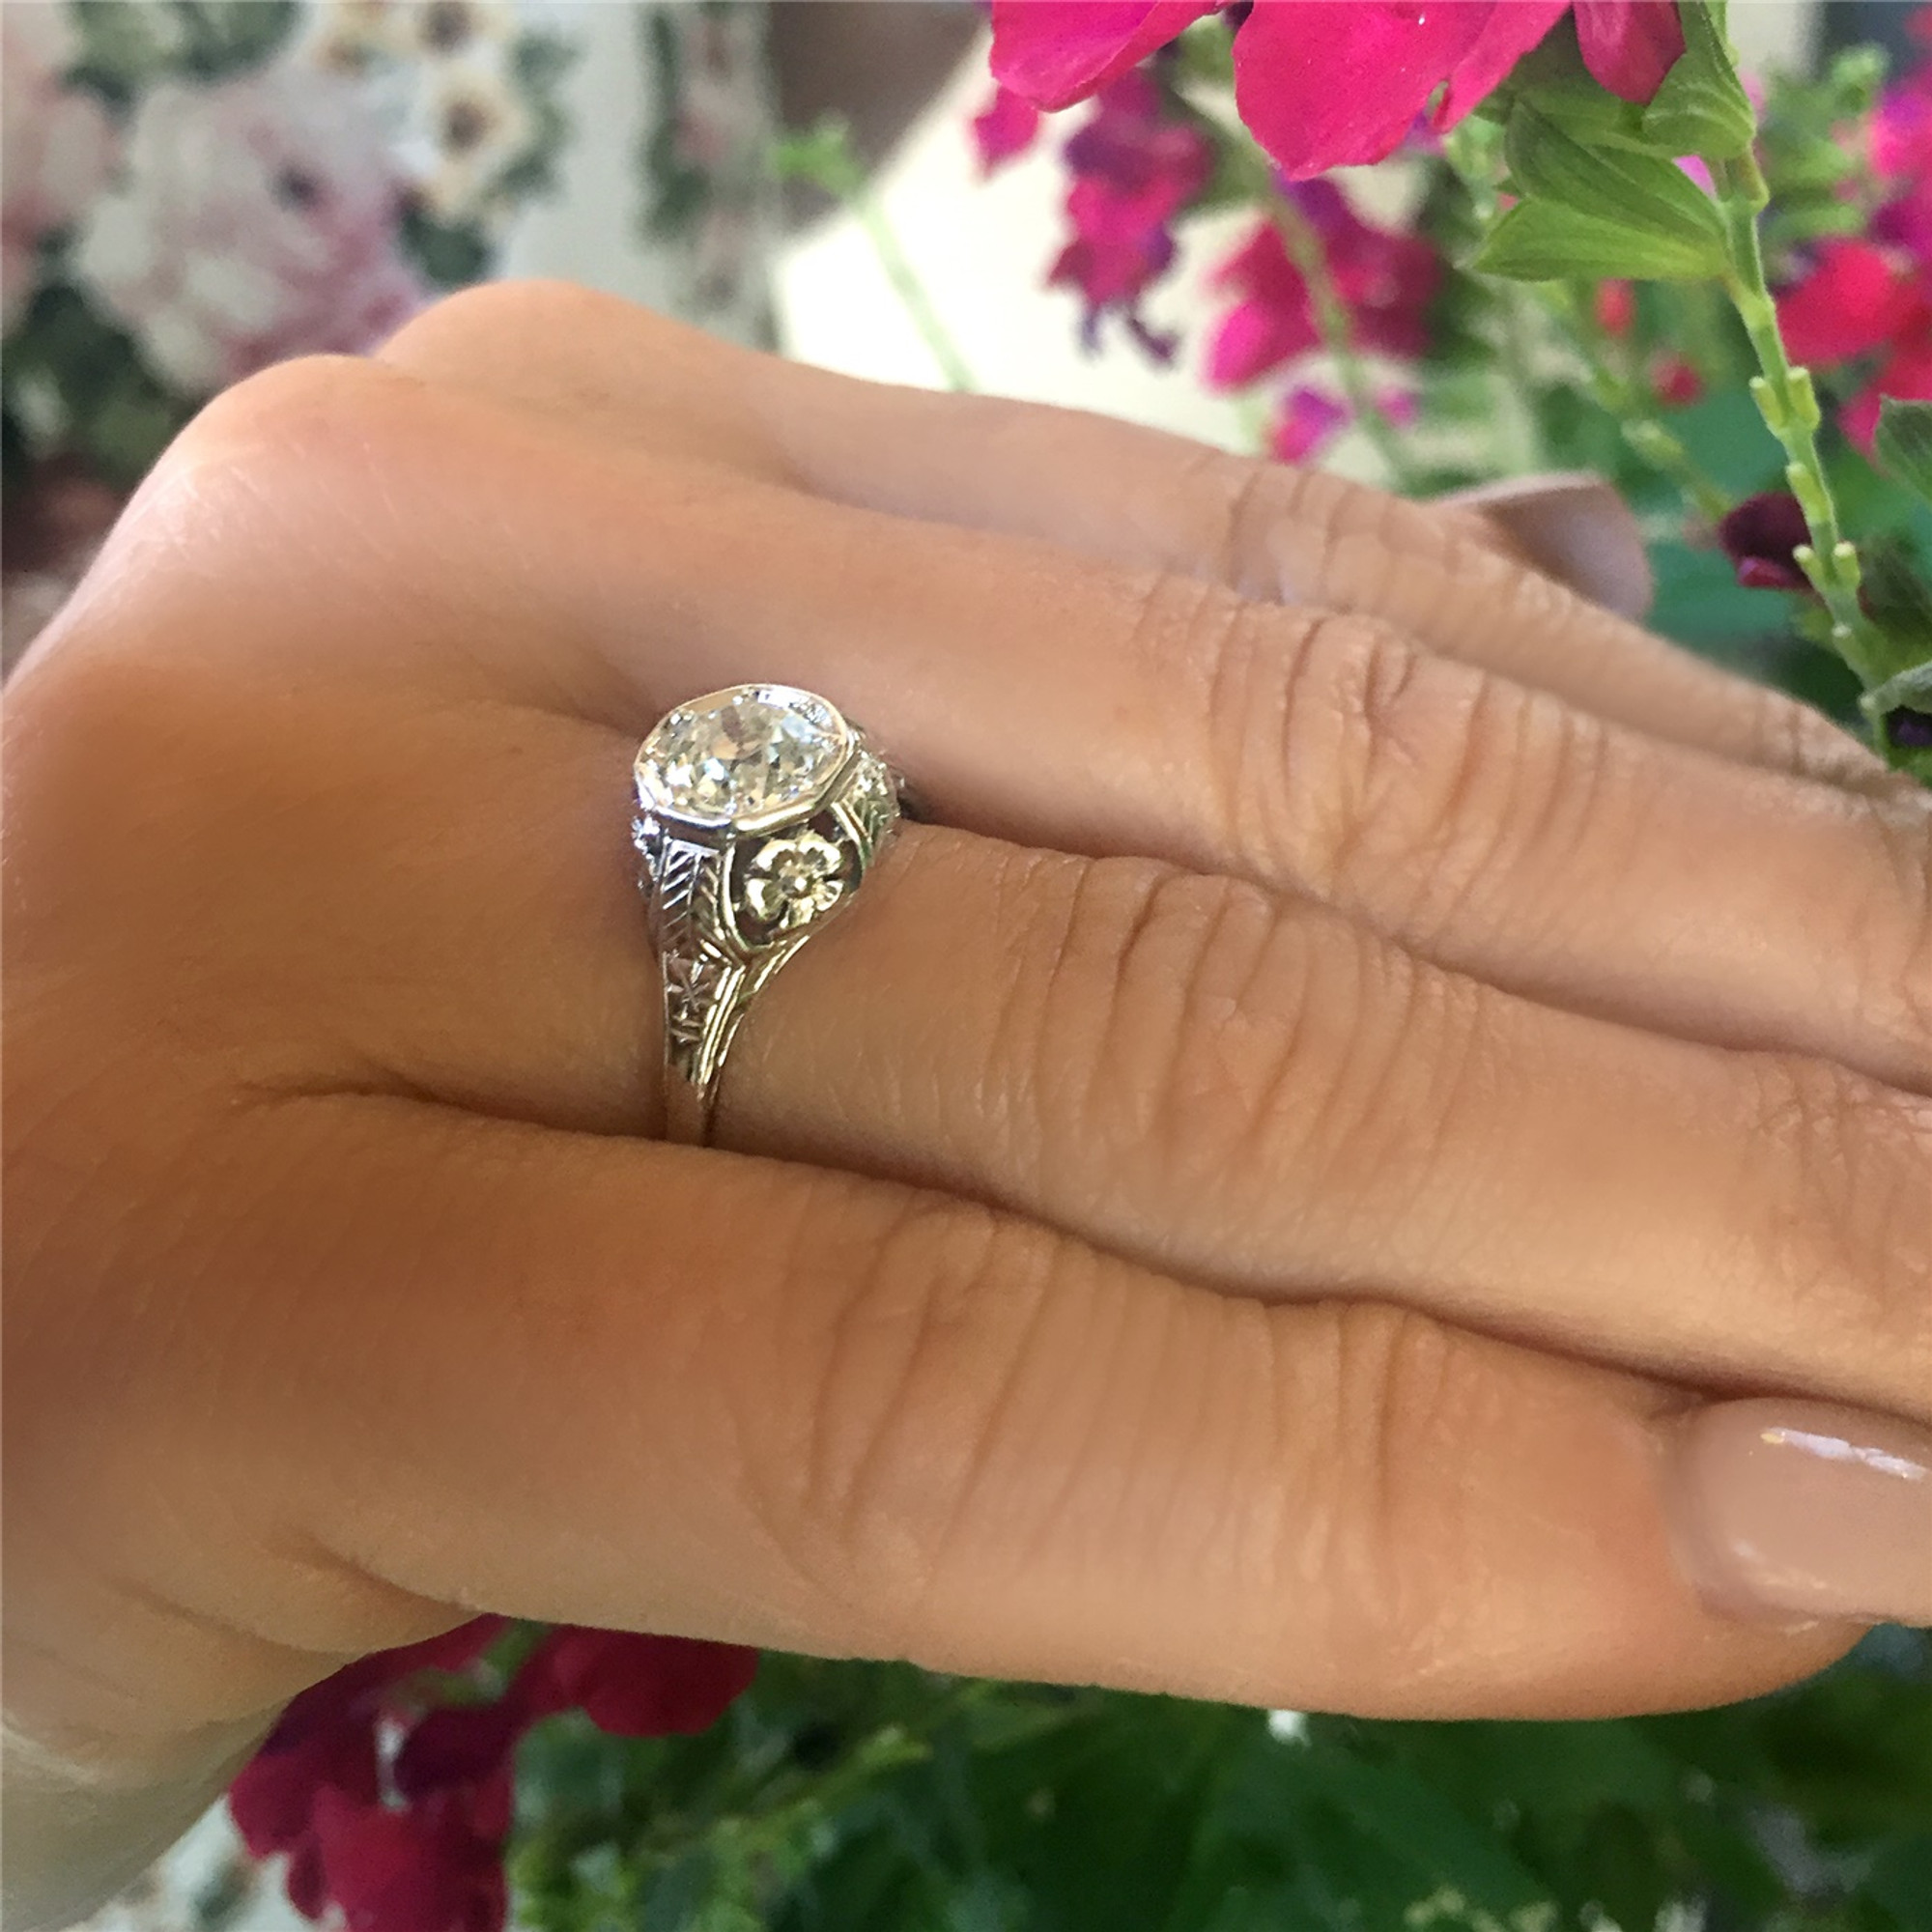 Where to buy vintage engagement rings and antique jewellery